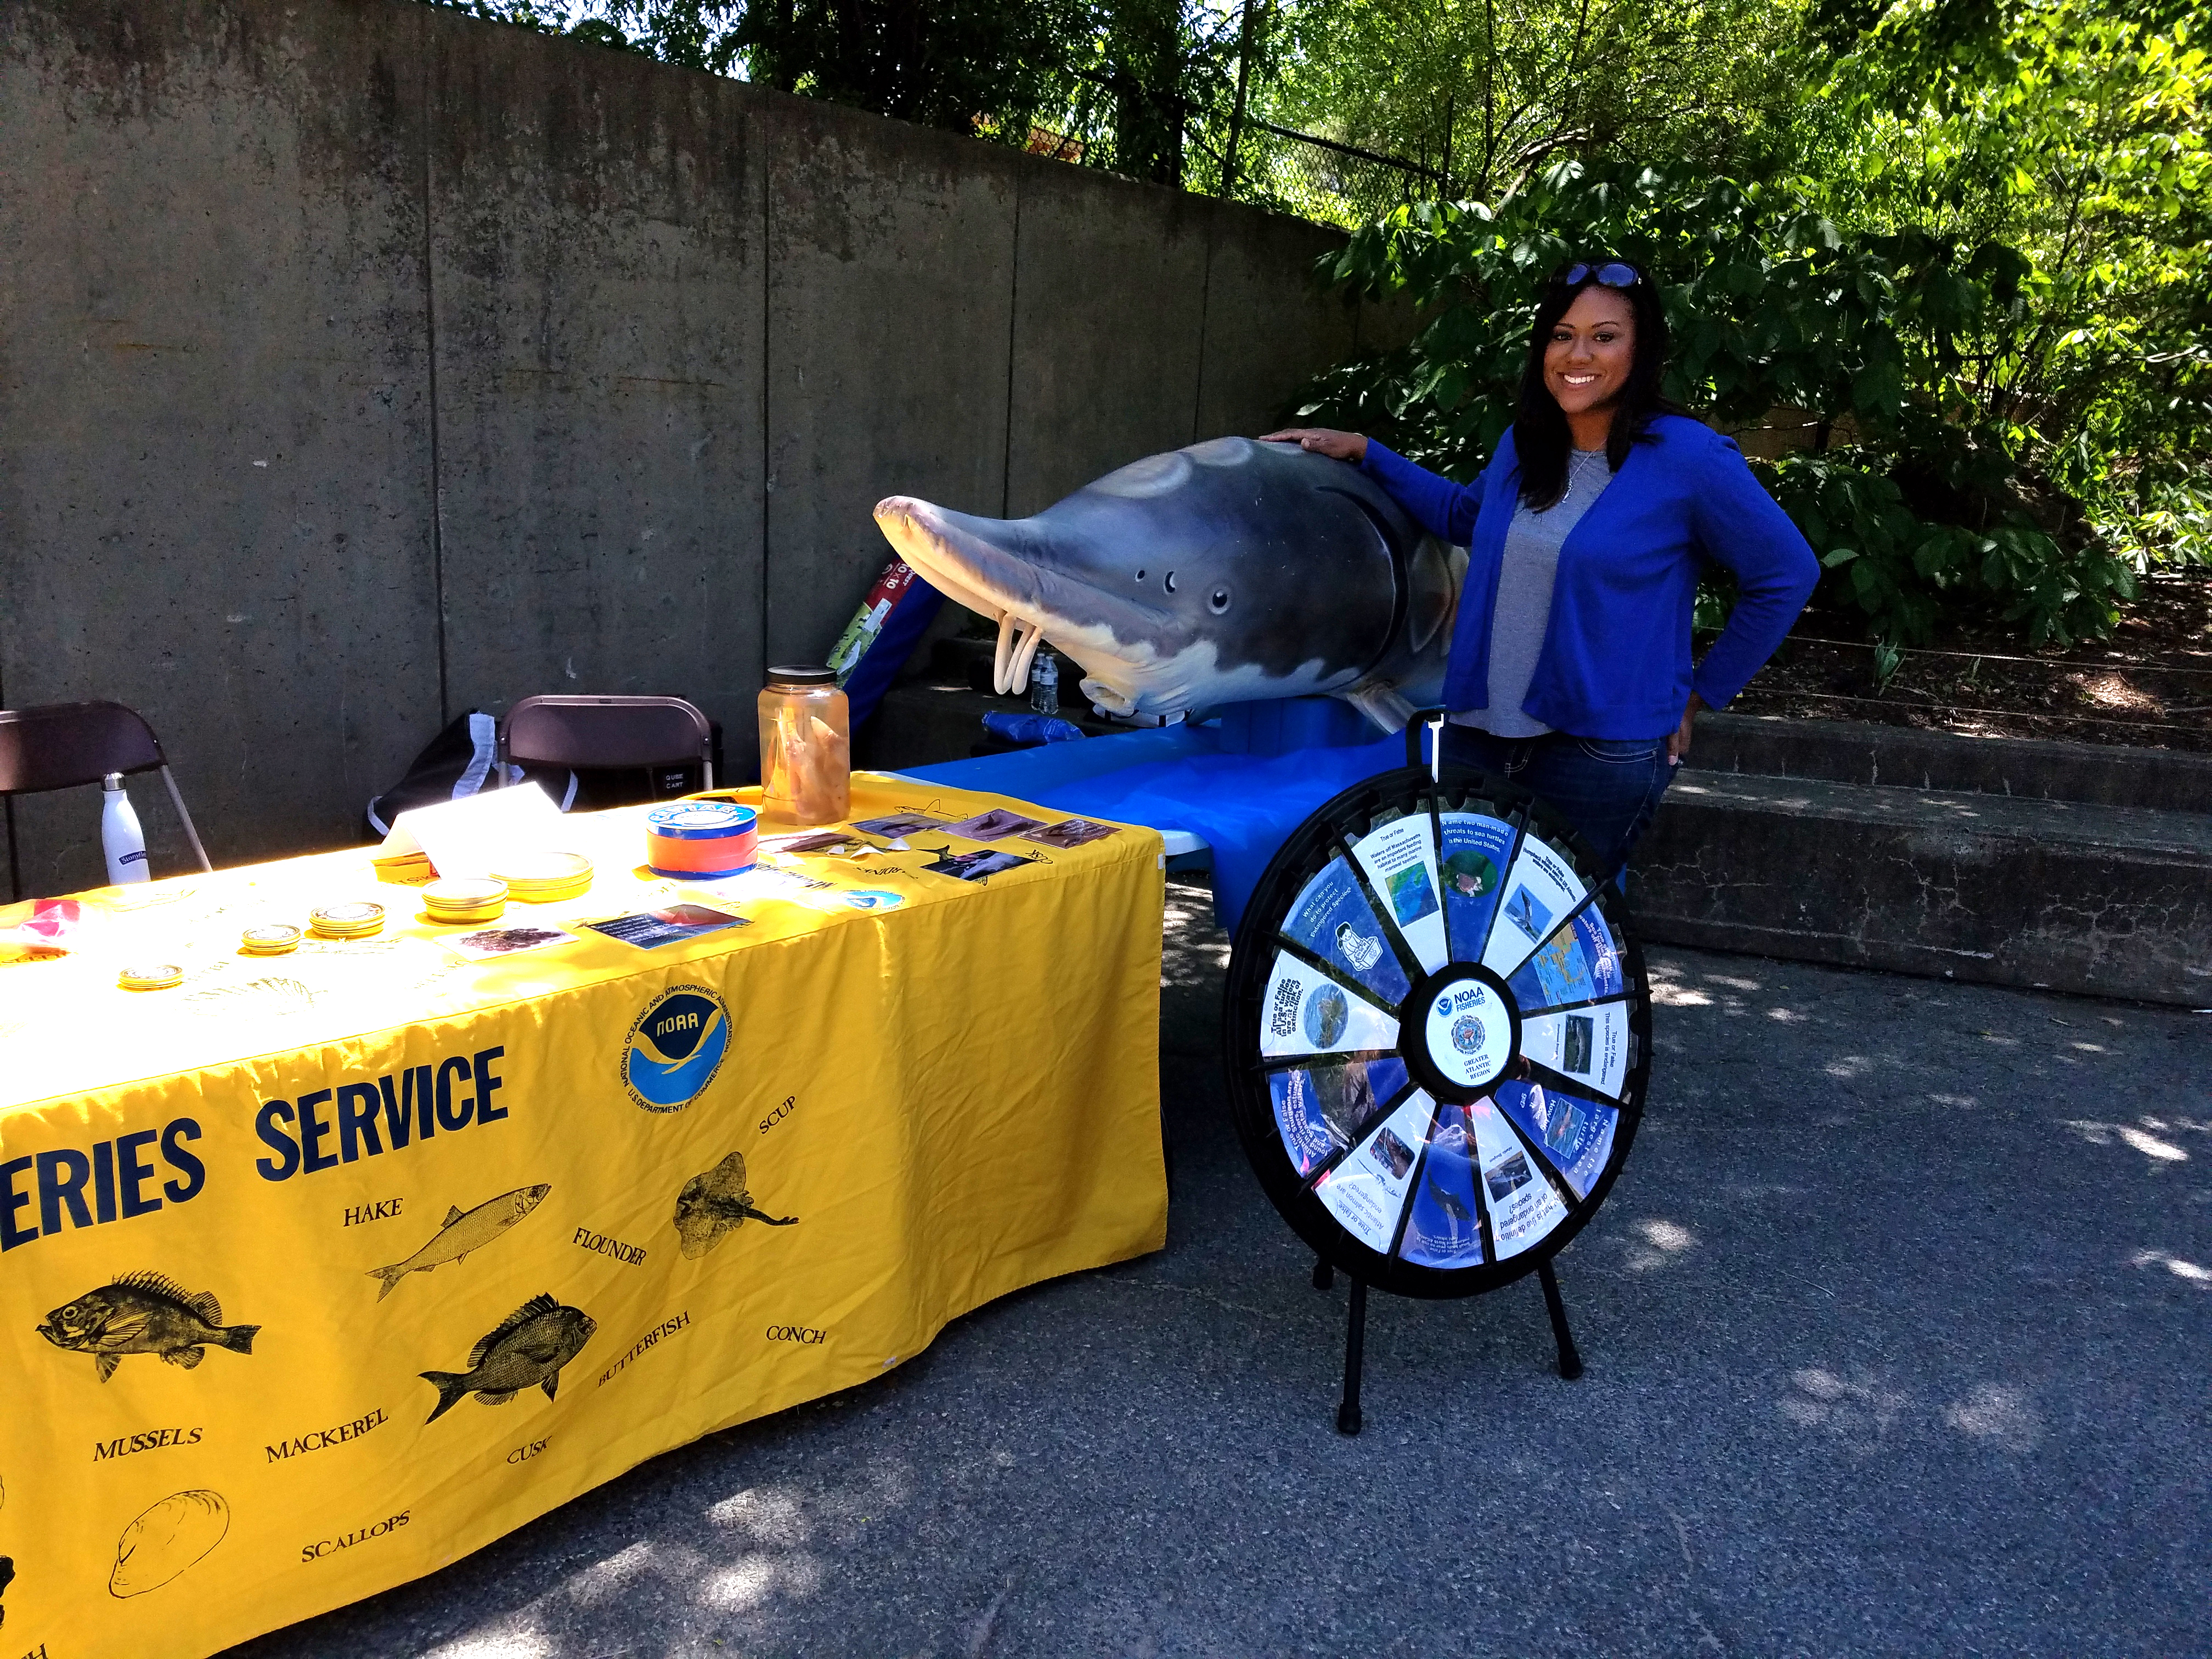 Jolvan Morris, an environmental scientist with Integrated Statistics, Inc. in support of NOAA Fisheries Greater Atlantic Regional Office, staffed a booth with "Barbel Bill," a model Atlantic sturgeon, at an Endangered Species Day event at the Franklin Park Zoo in Boston, MA. Both shortnose sturgeon and Atlantic sturgeon are protected under the Endangered Species Act due previous overfishing, ship strikes, incidental catch mortality, and several other human-caused factors. Atlantic sturgeon are large fish,